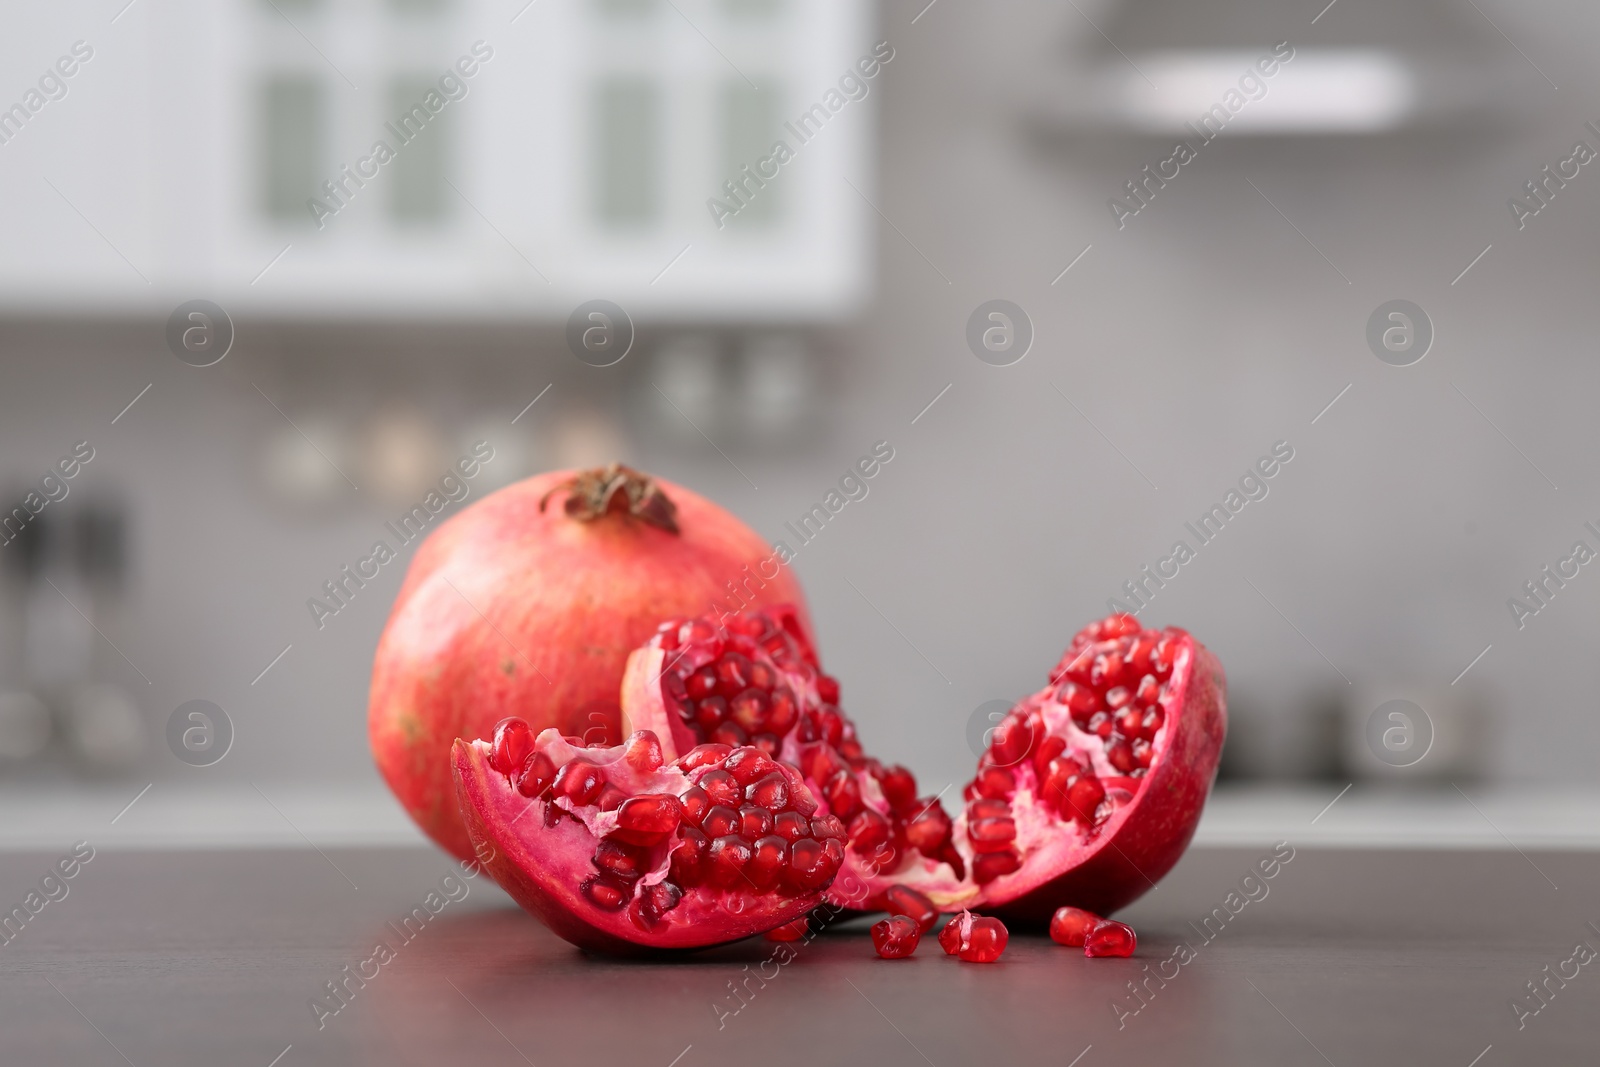 Photo of Whole and cut pomegranates on wooden counter in kitchen